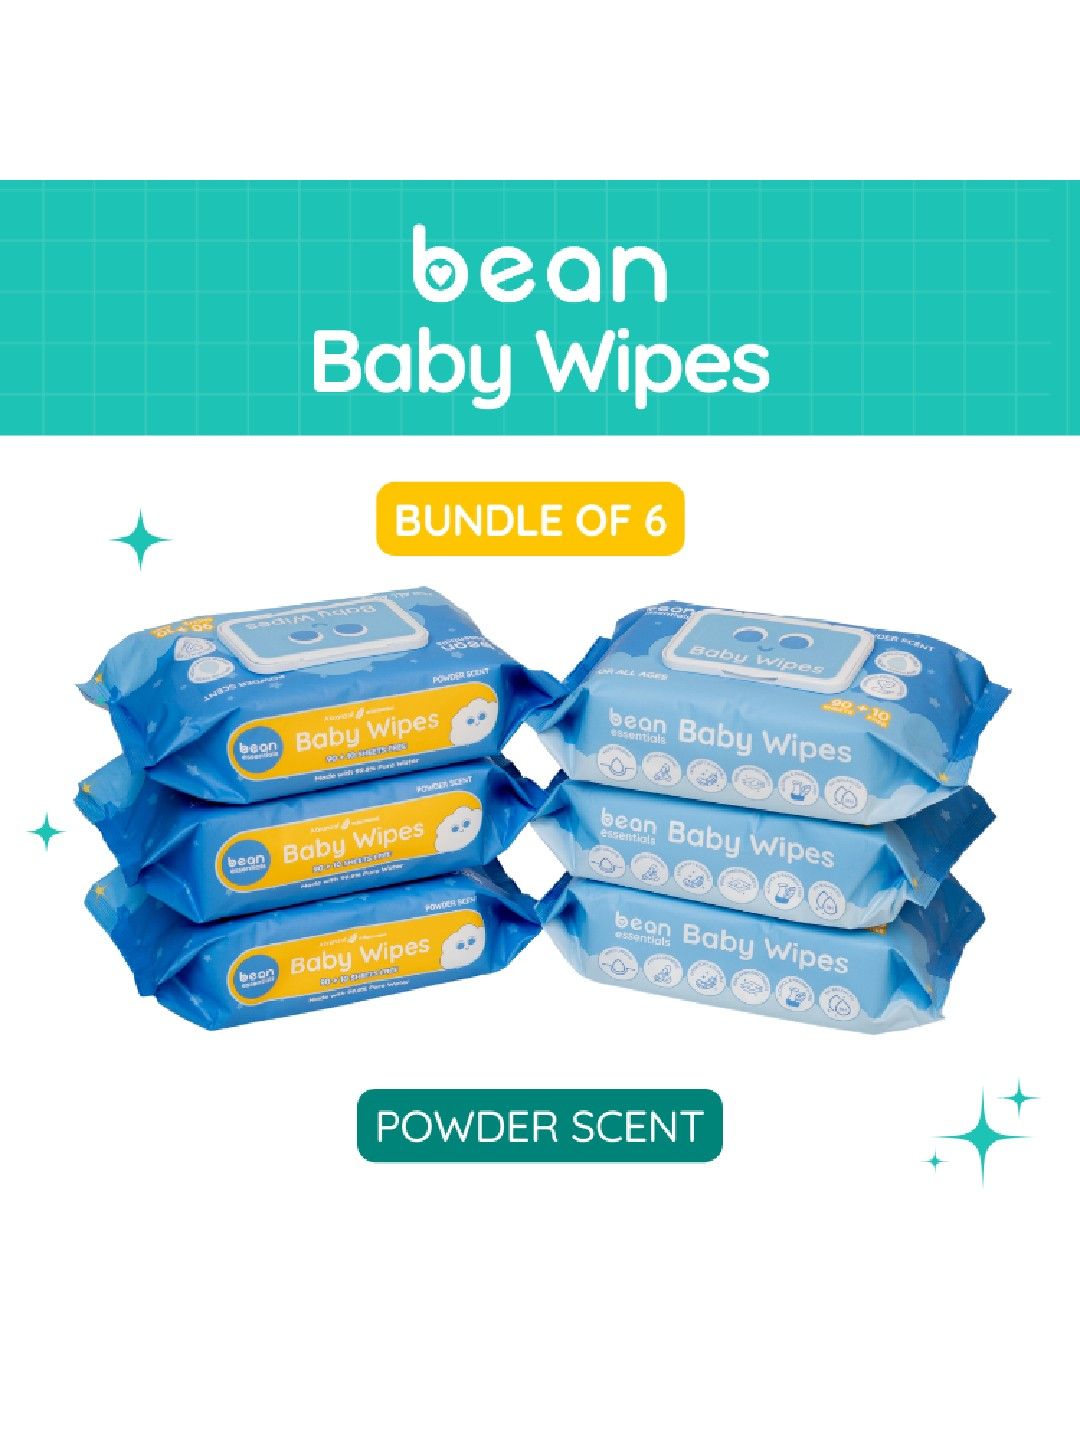 bean essentials [Bundle of 6] Baby Wipes Powder Scented 6 x 100 sheets (No Color- Image 1)